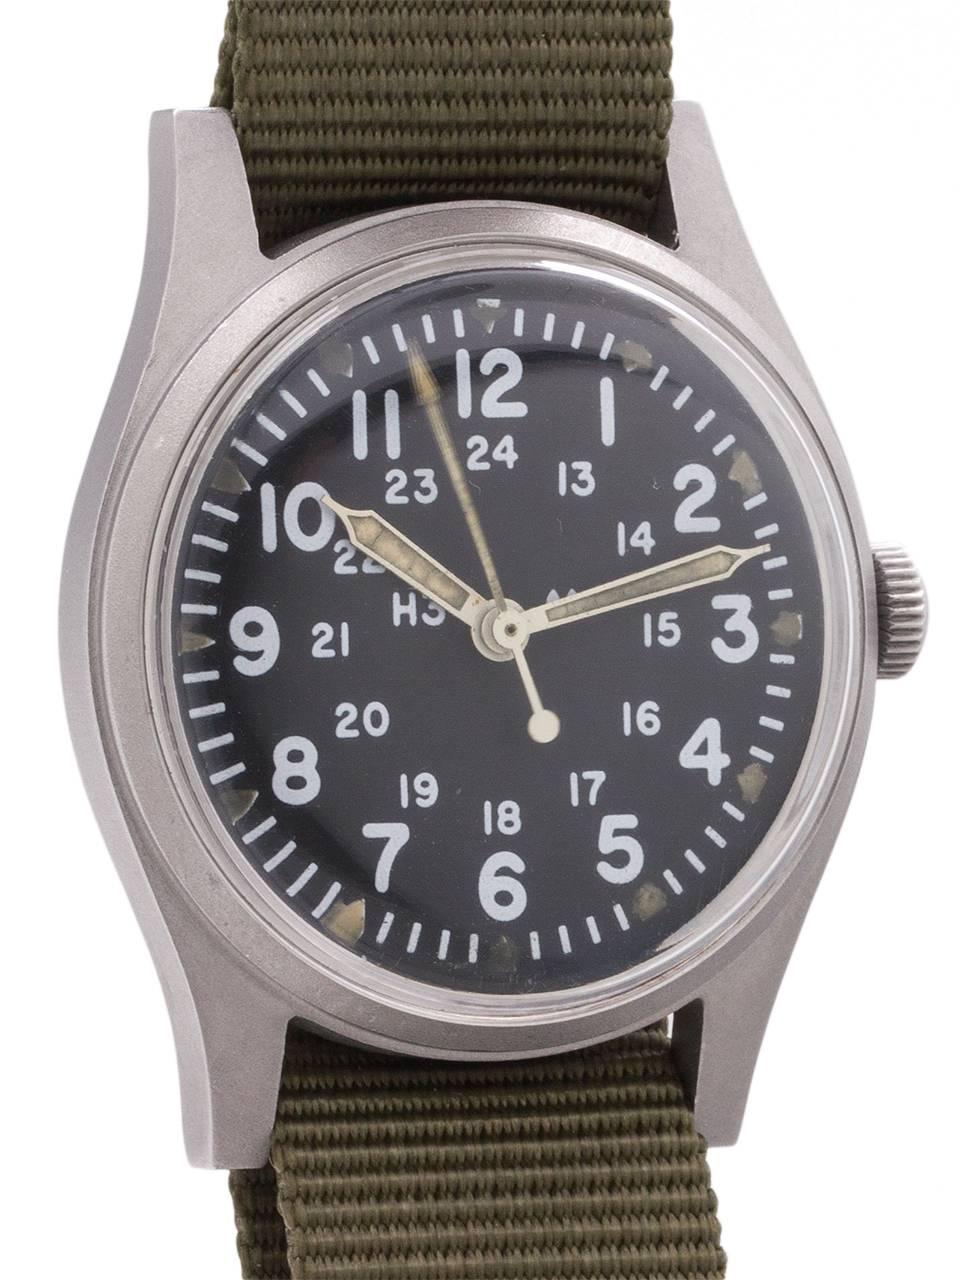 
US Military issue Hamilton man’s wristwatch Vietnam era featuring 34 X 41mm non reflective brushed finish base metal case, acrylic crystal, and original matte black dial with 24 hour indexes and triangular luminous hour indexes, luminous hands and